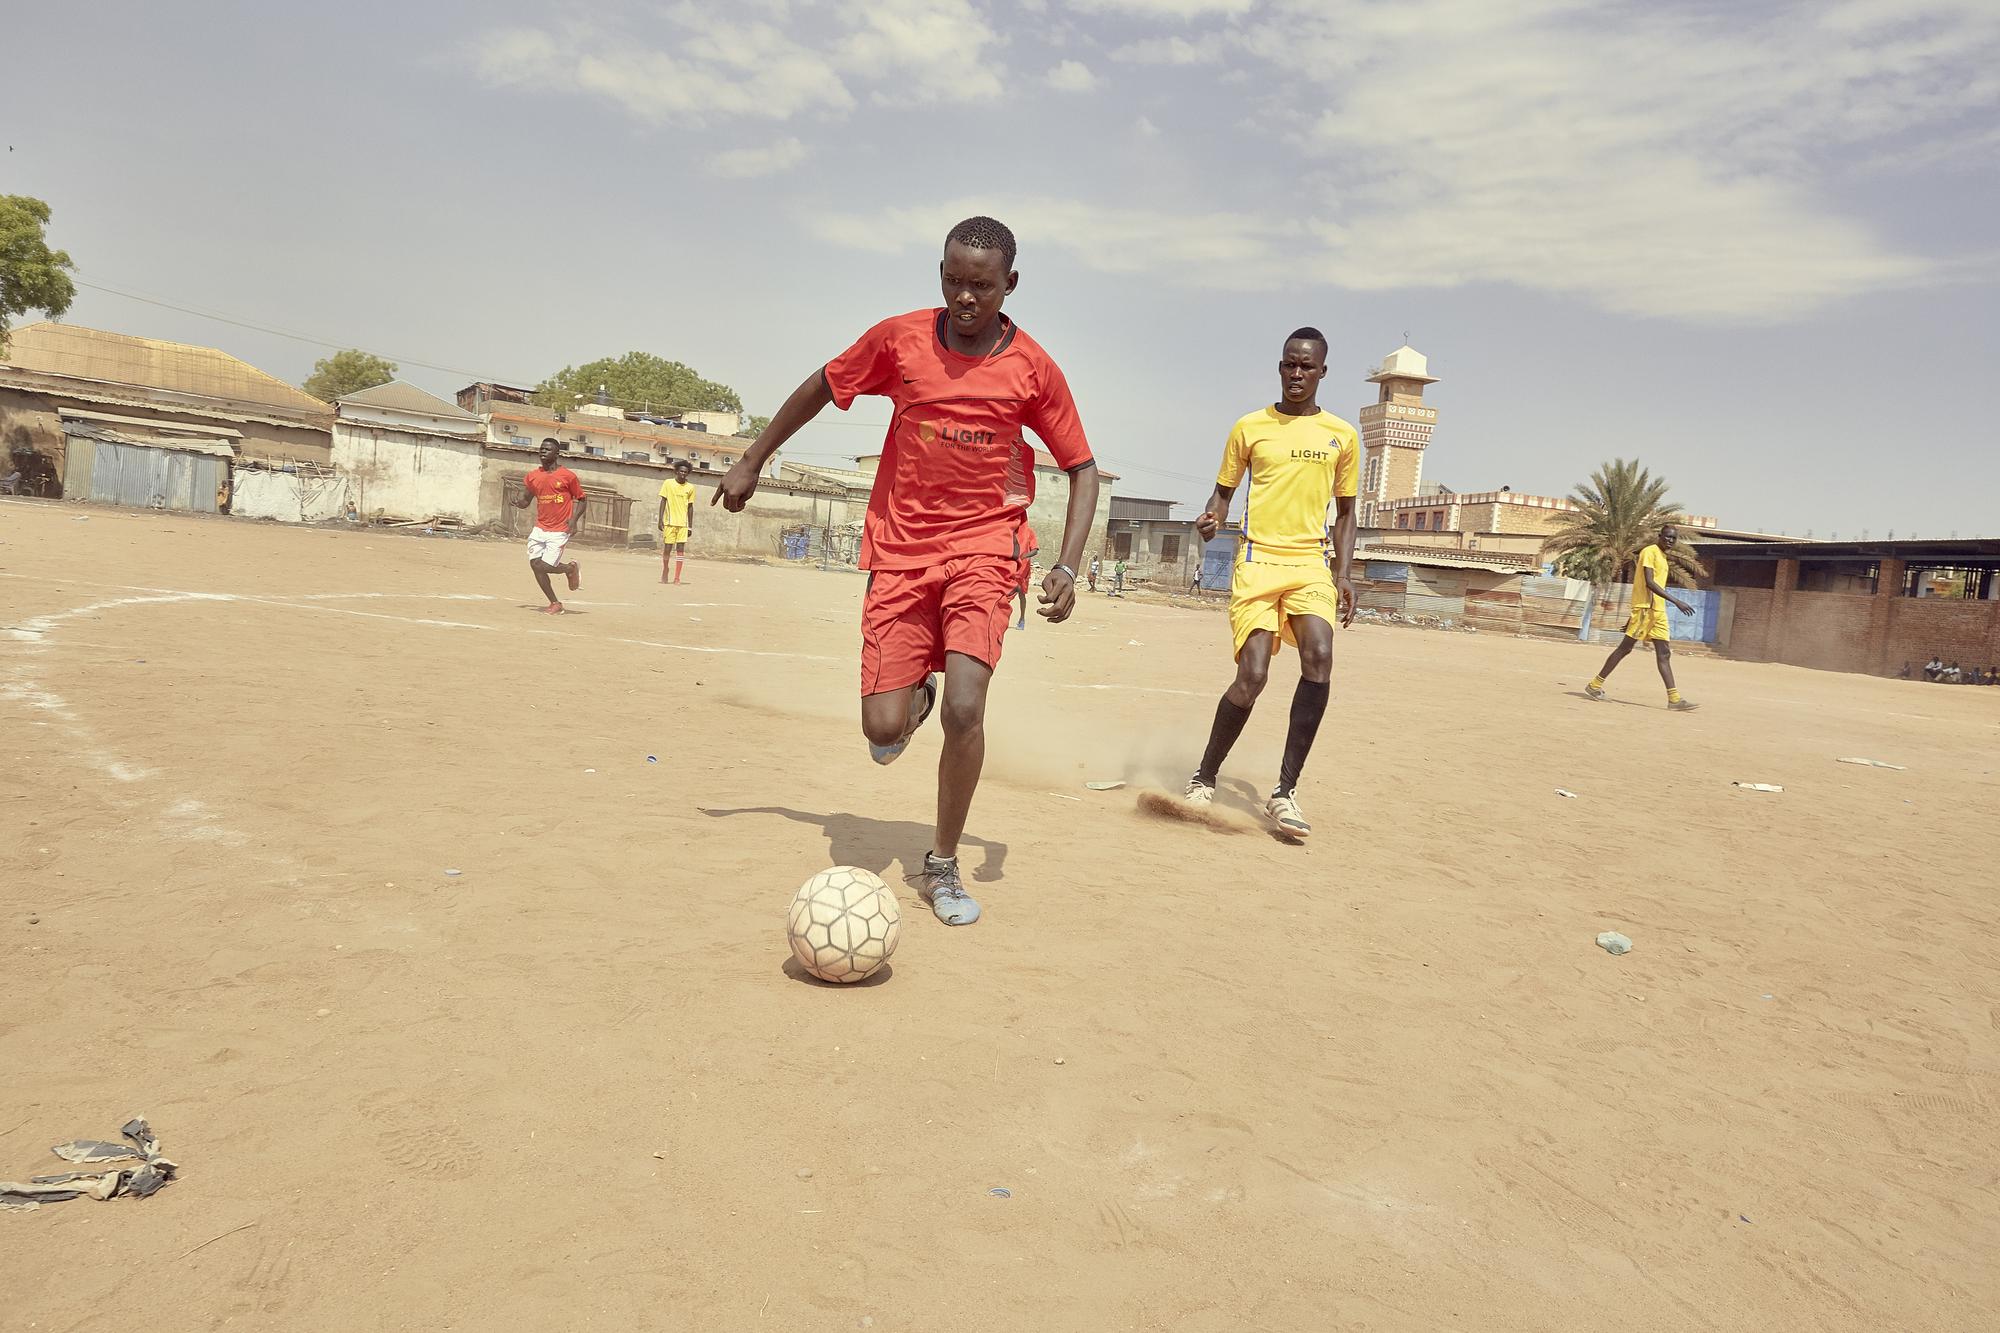 Two members of the Sports for Peace team, one in red and one in yellow, play football on a dusty pitch in South Sudan. 